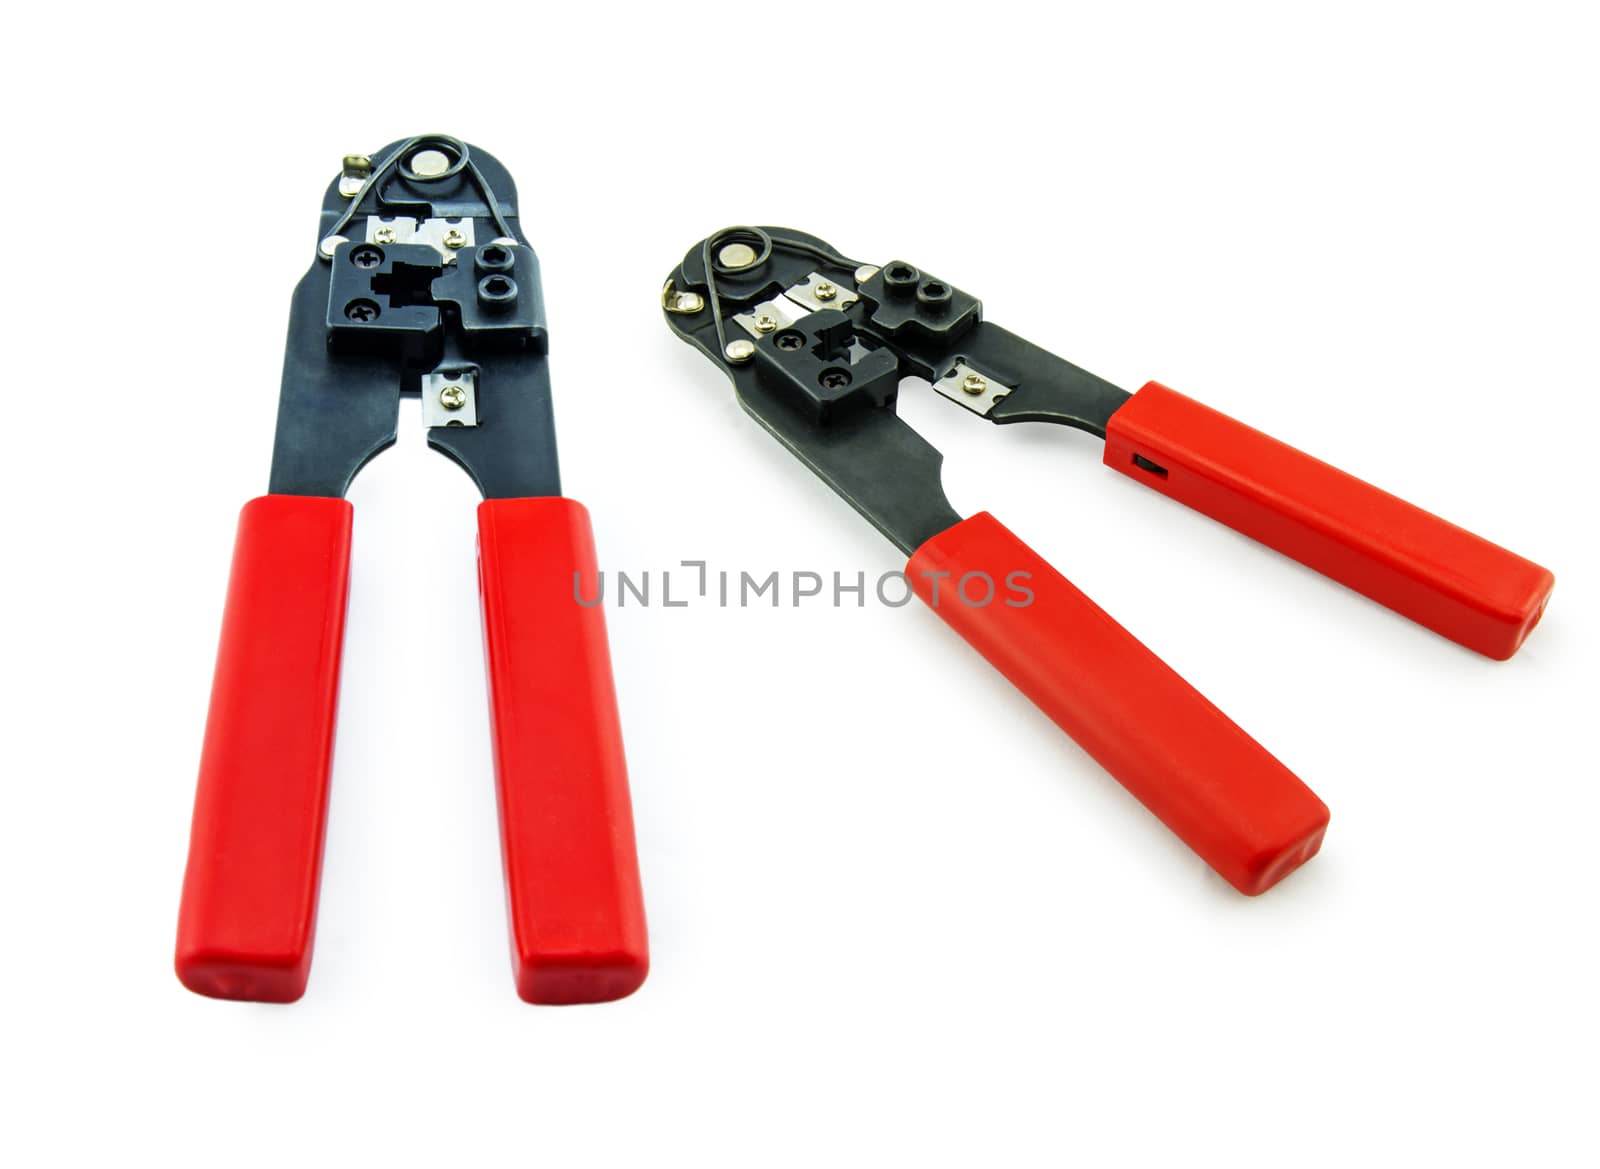 Tool for crimping network cable. For your commercial and editorial use